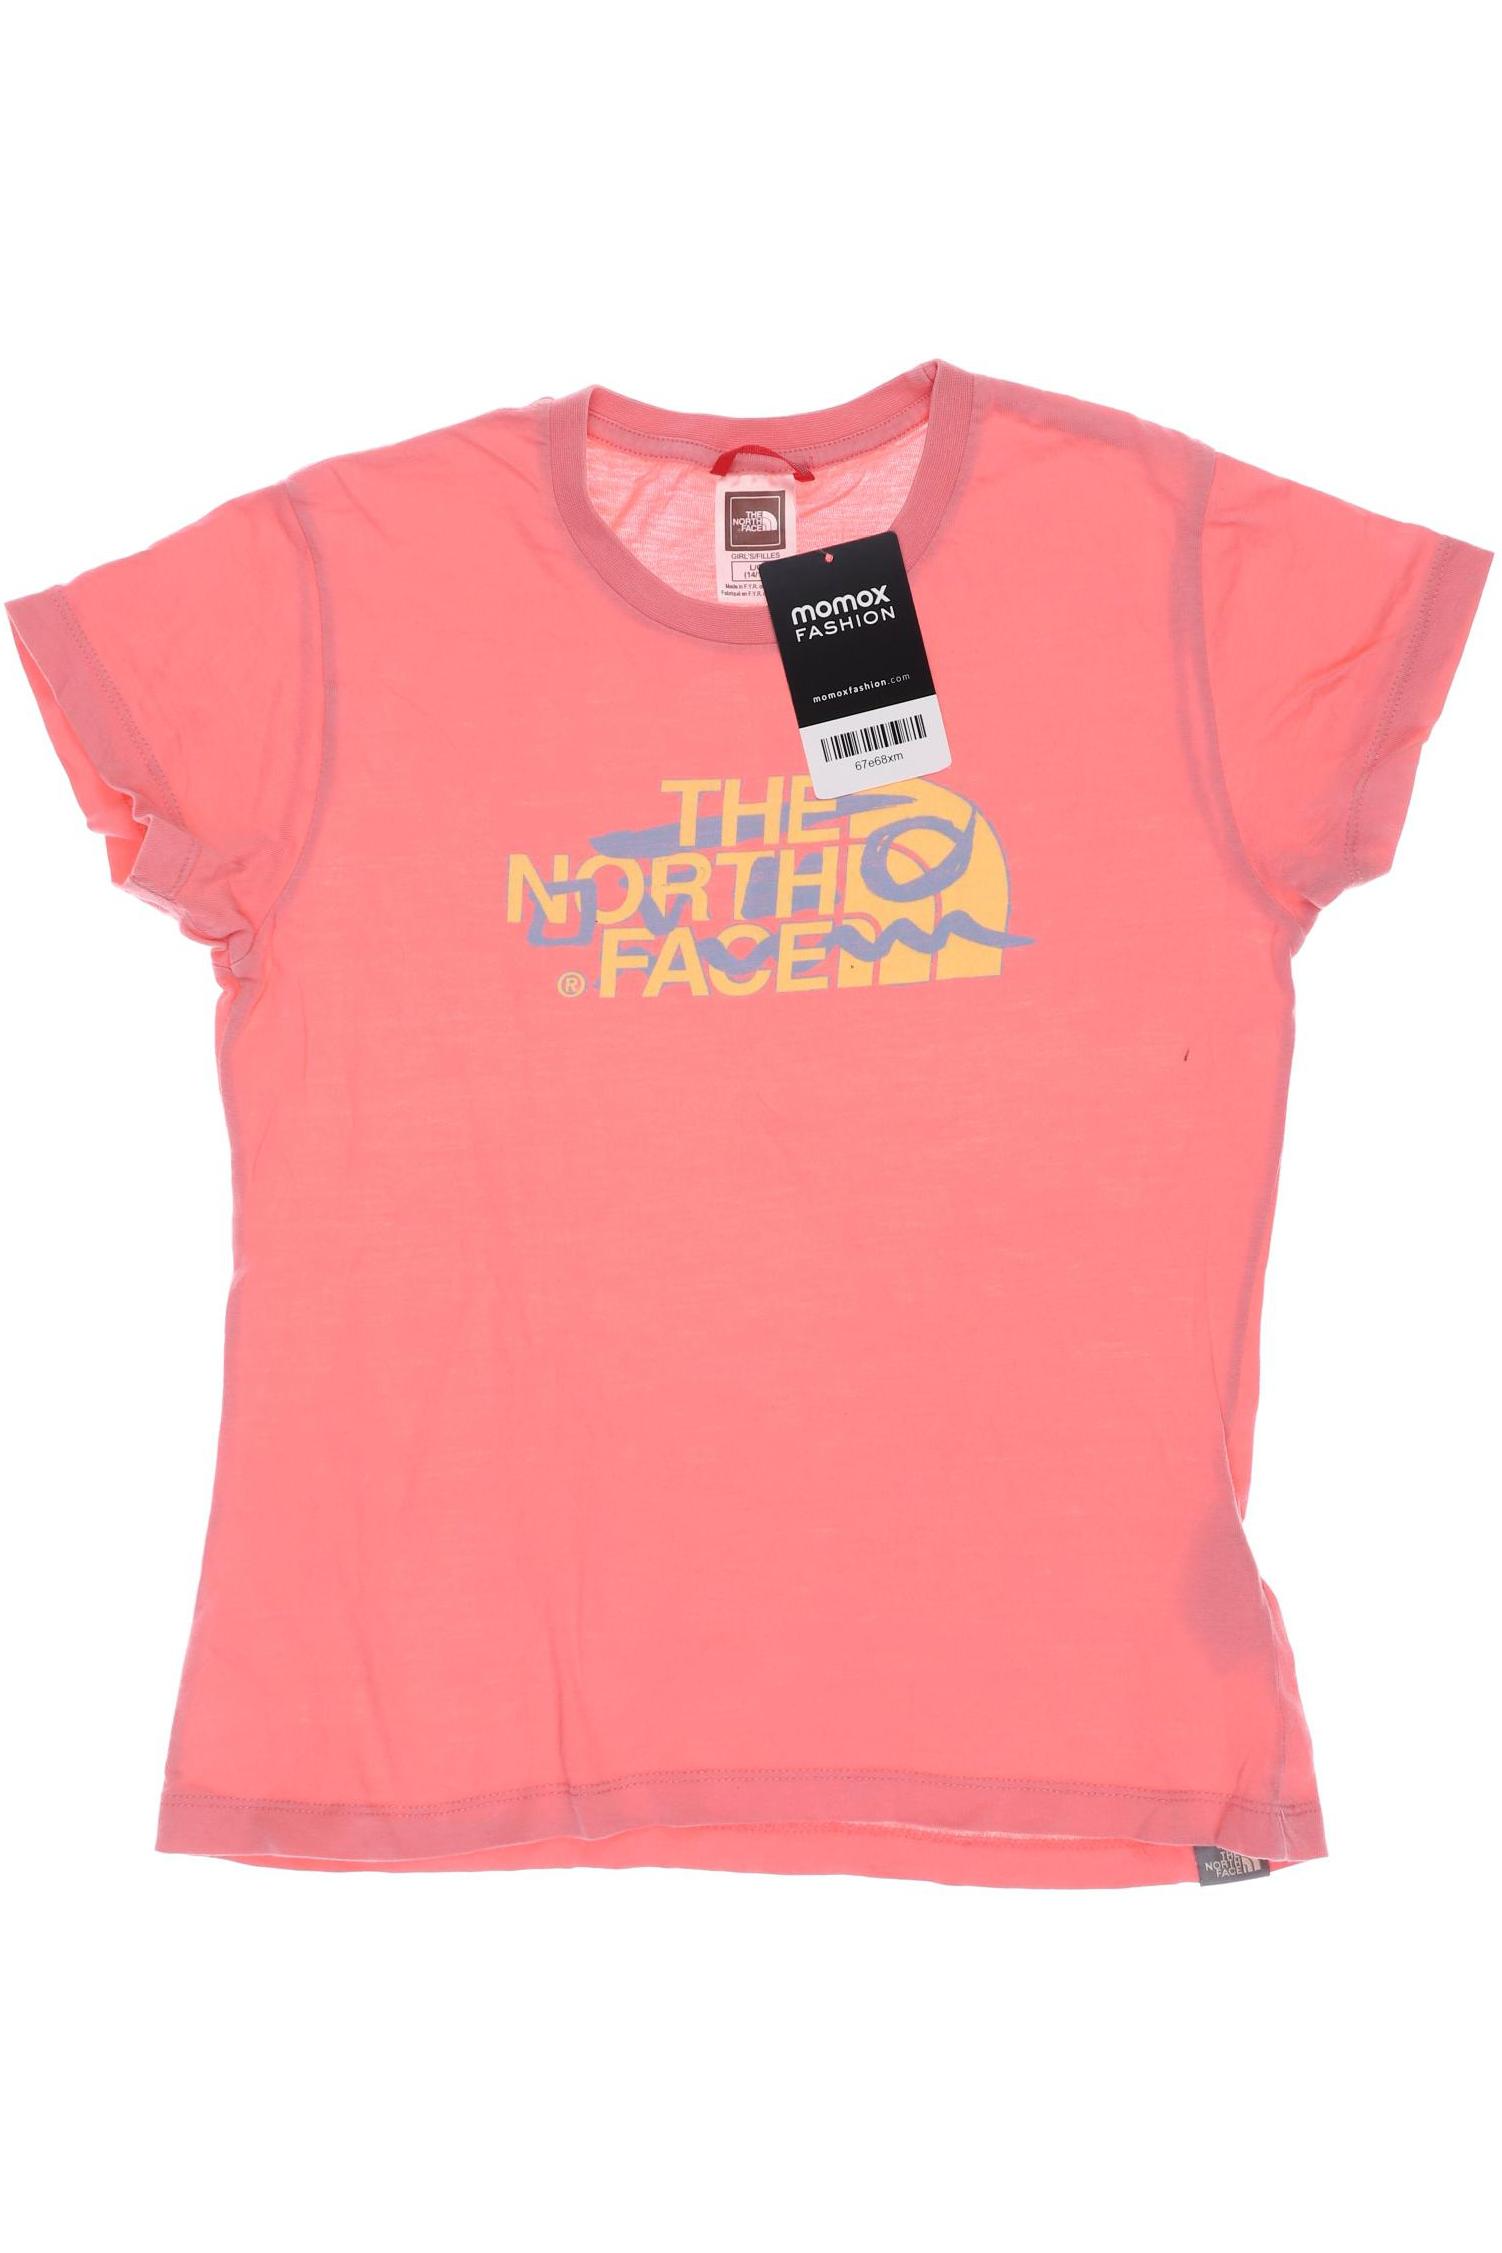 The North Face Damen T-Shirt, pink, Gr. 158 von The North Face